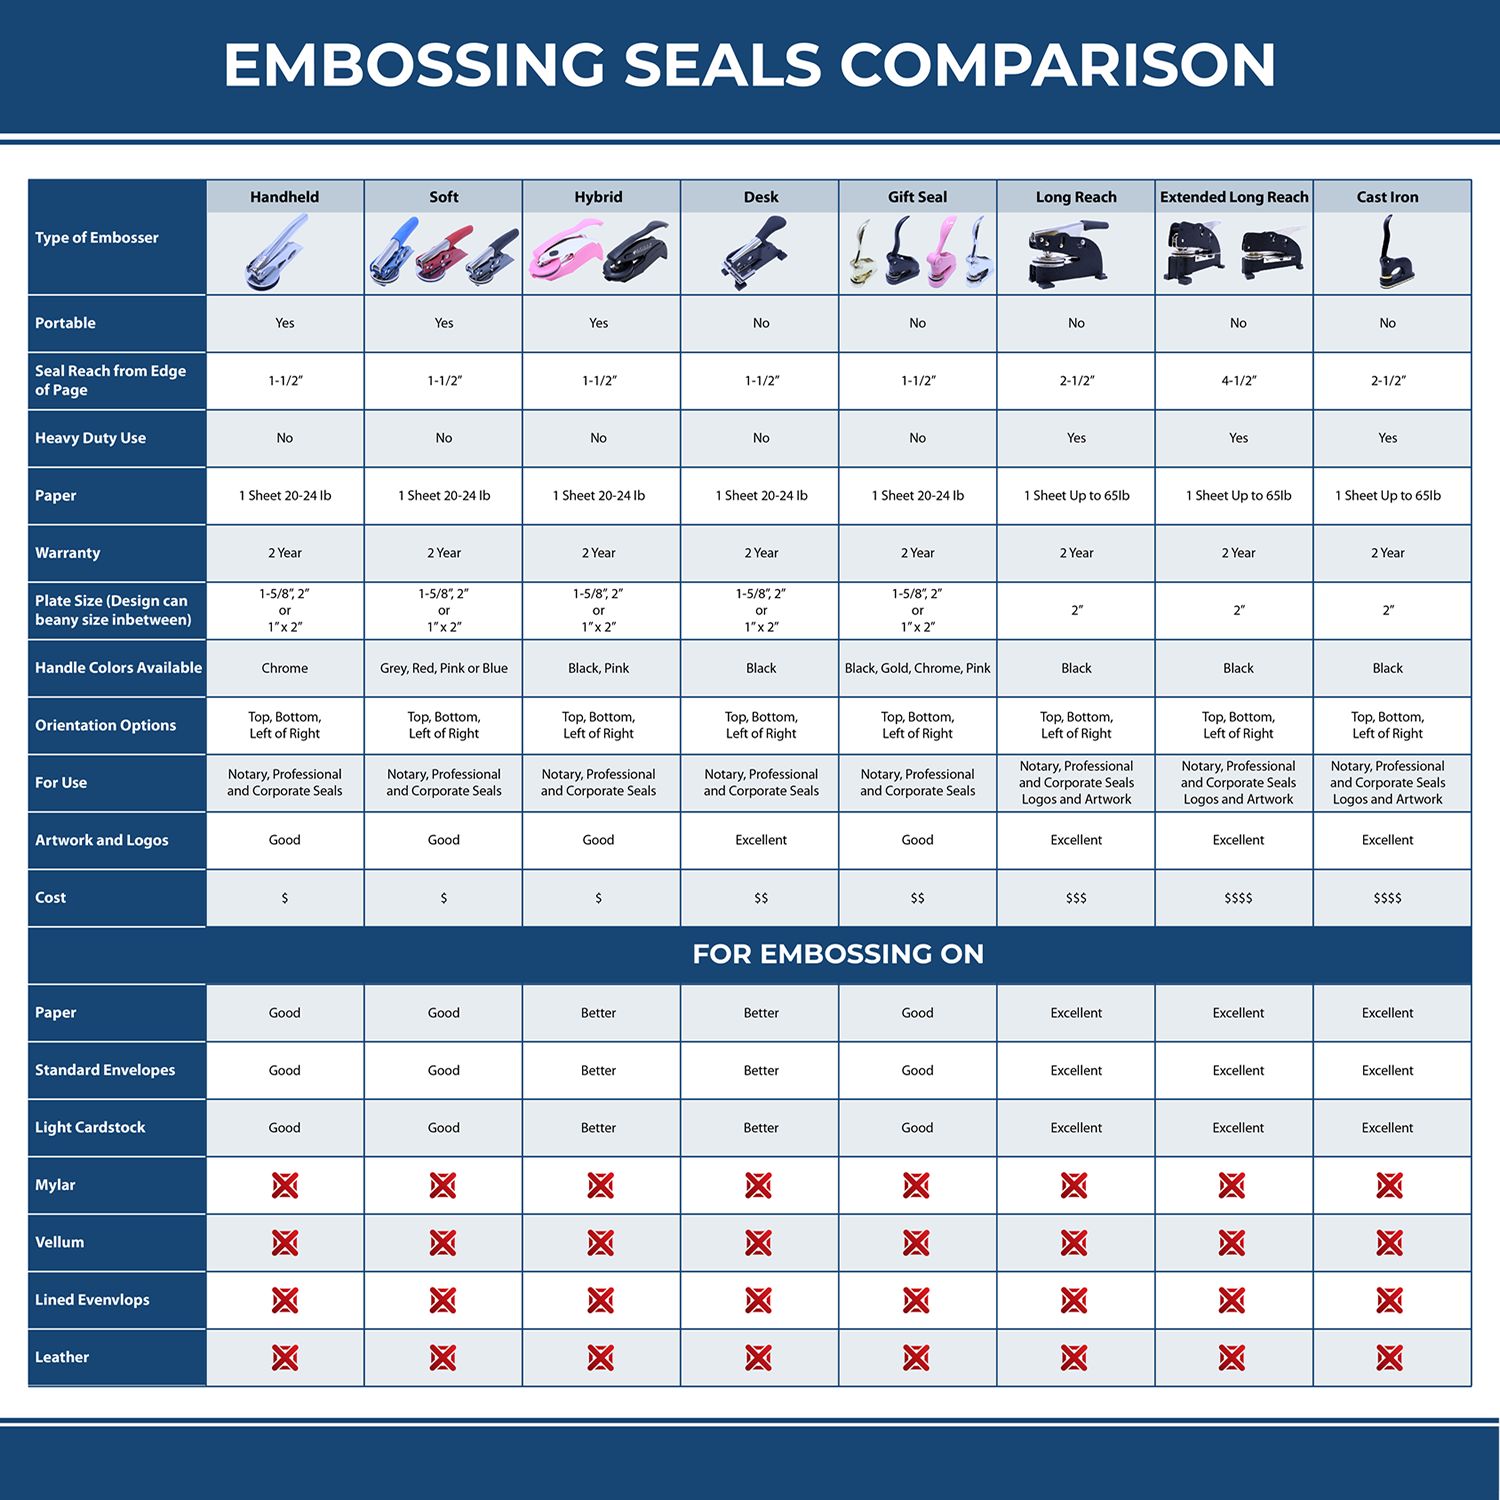 A comparison chart for the different types of mount models available for the Handheld Puerto Rico Professional Engineer Embosser.